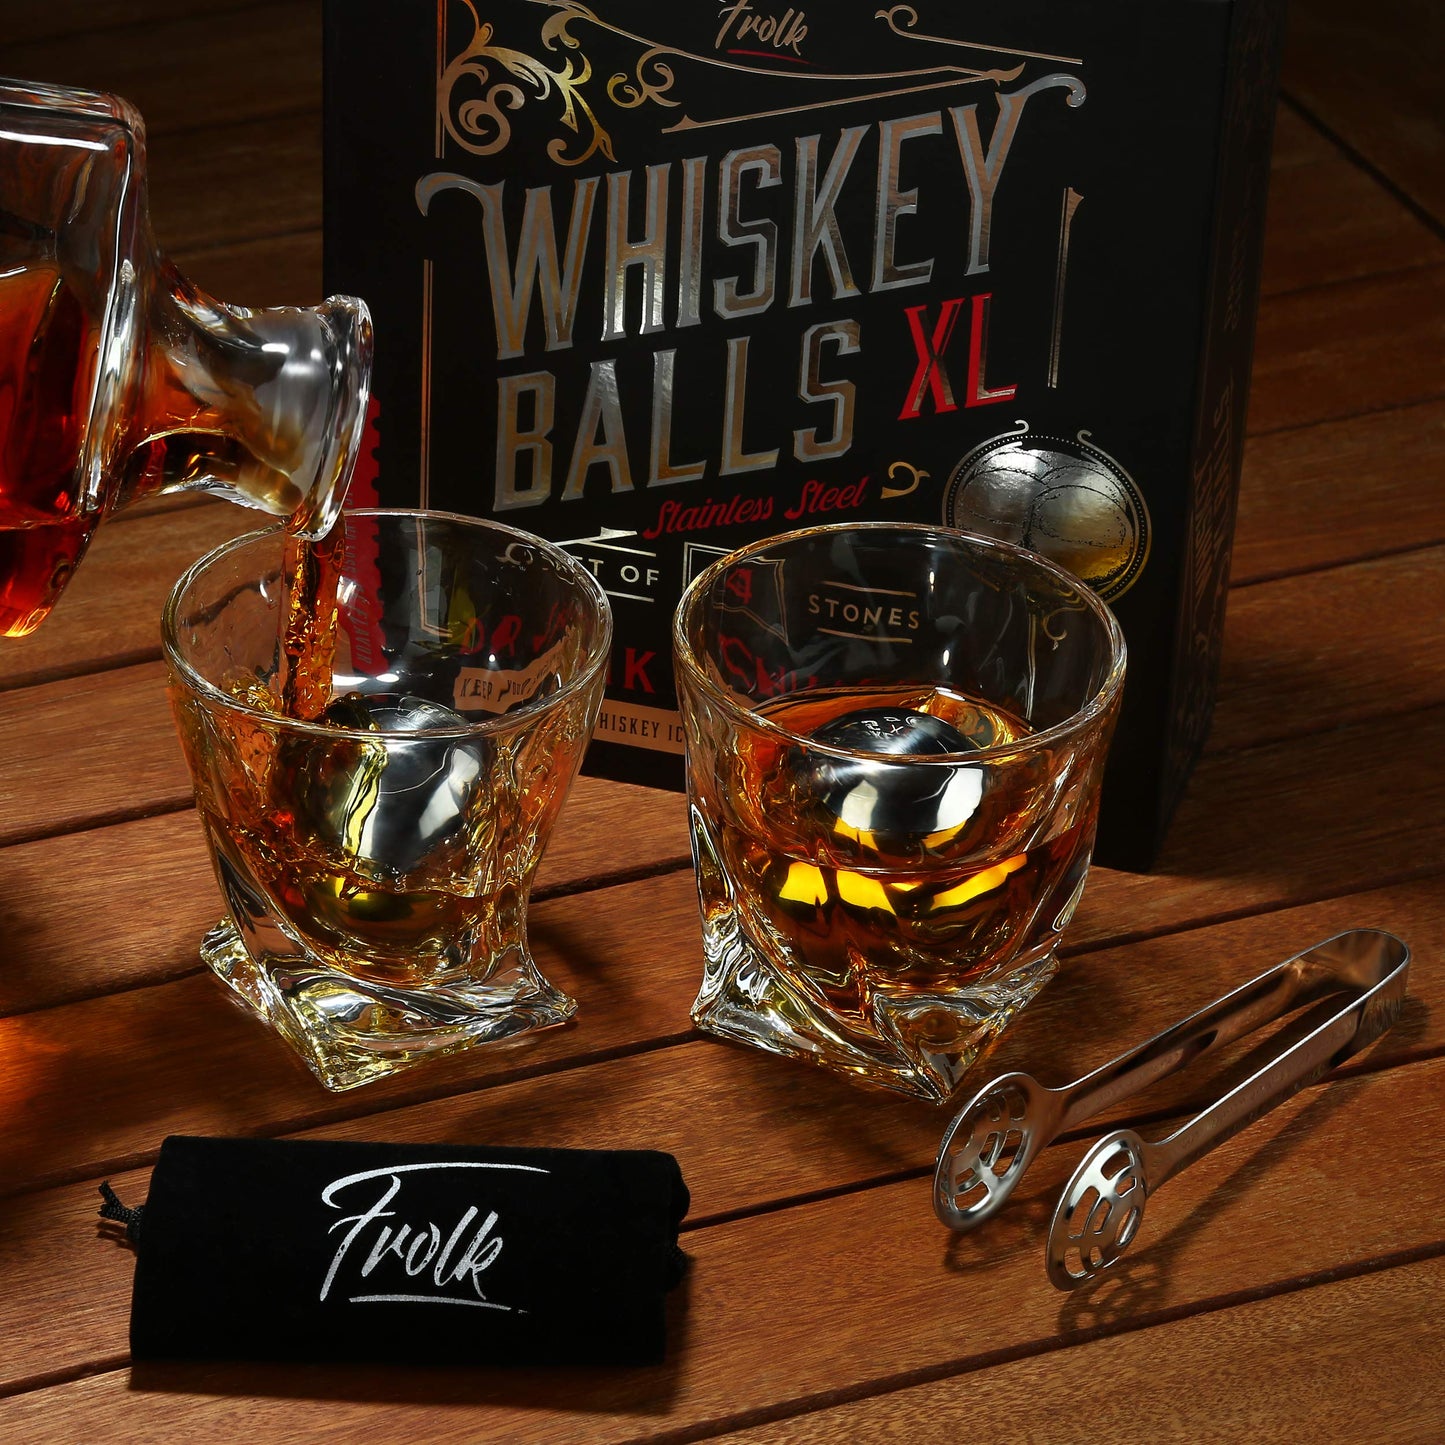 Gifts for Him - Men Dad Husband - 4 XL Stainless Steel Whisky Ice Balls, Special Tongs & Freezer Pouch in Luxury Gift Box for Whiskey Lovers!